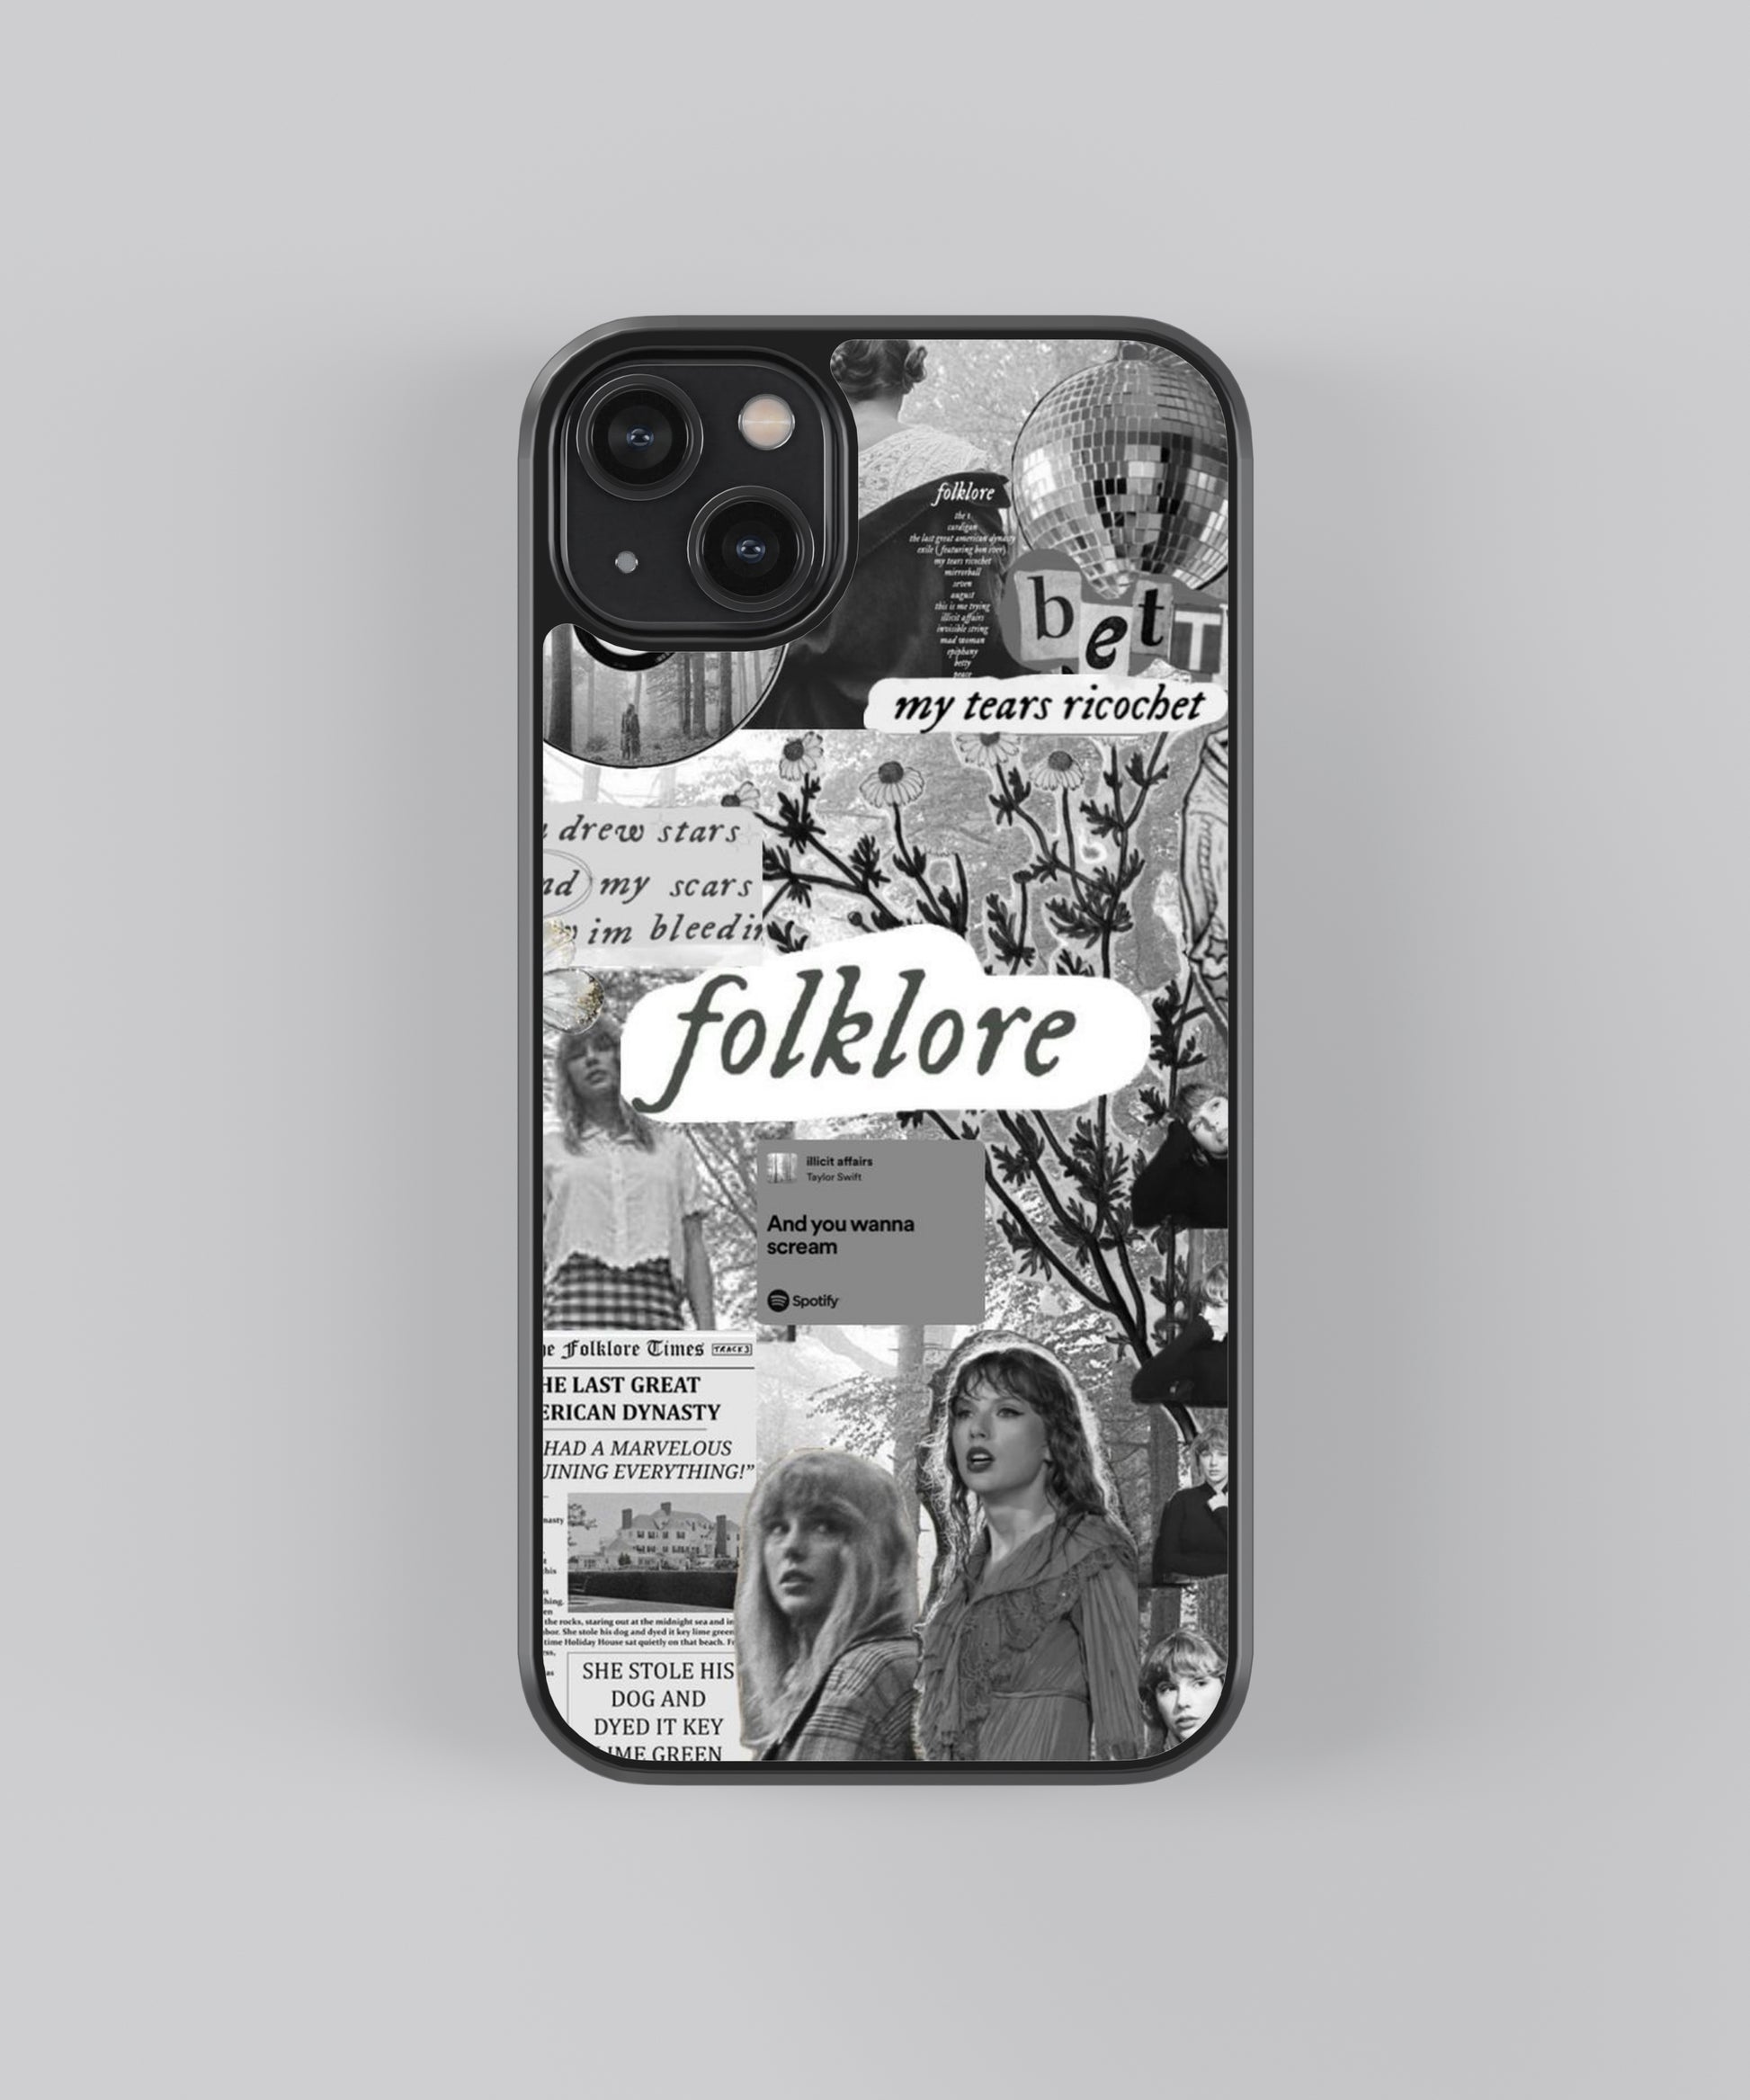 Taylor Swift Folklore Spotify Glass Phone Case Cover - Aesthetic Phone Cases - Culltique